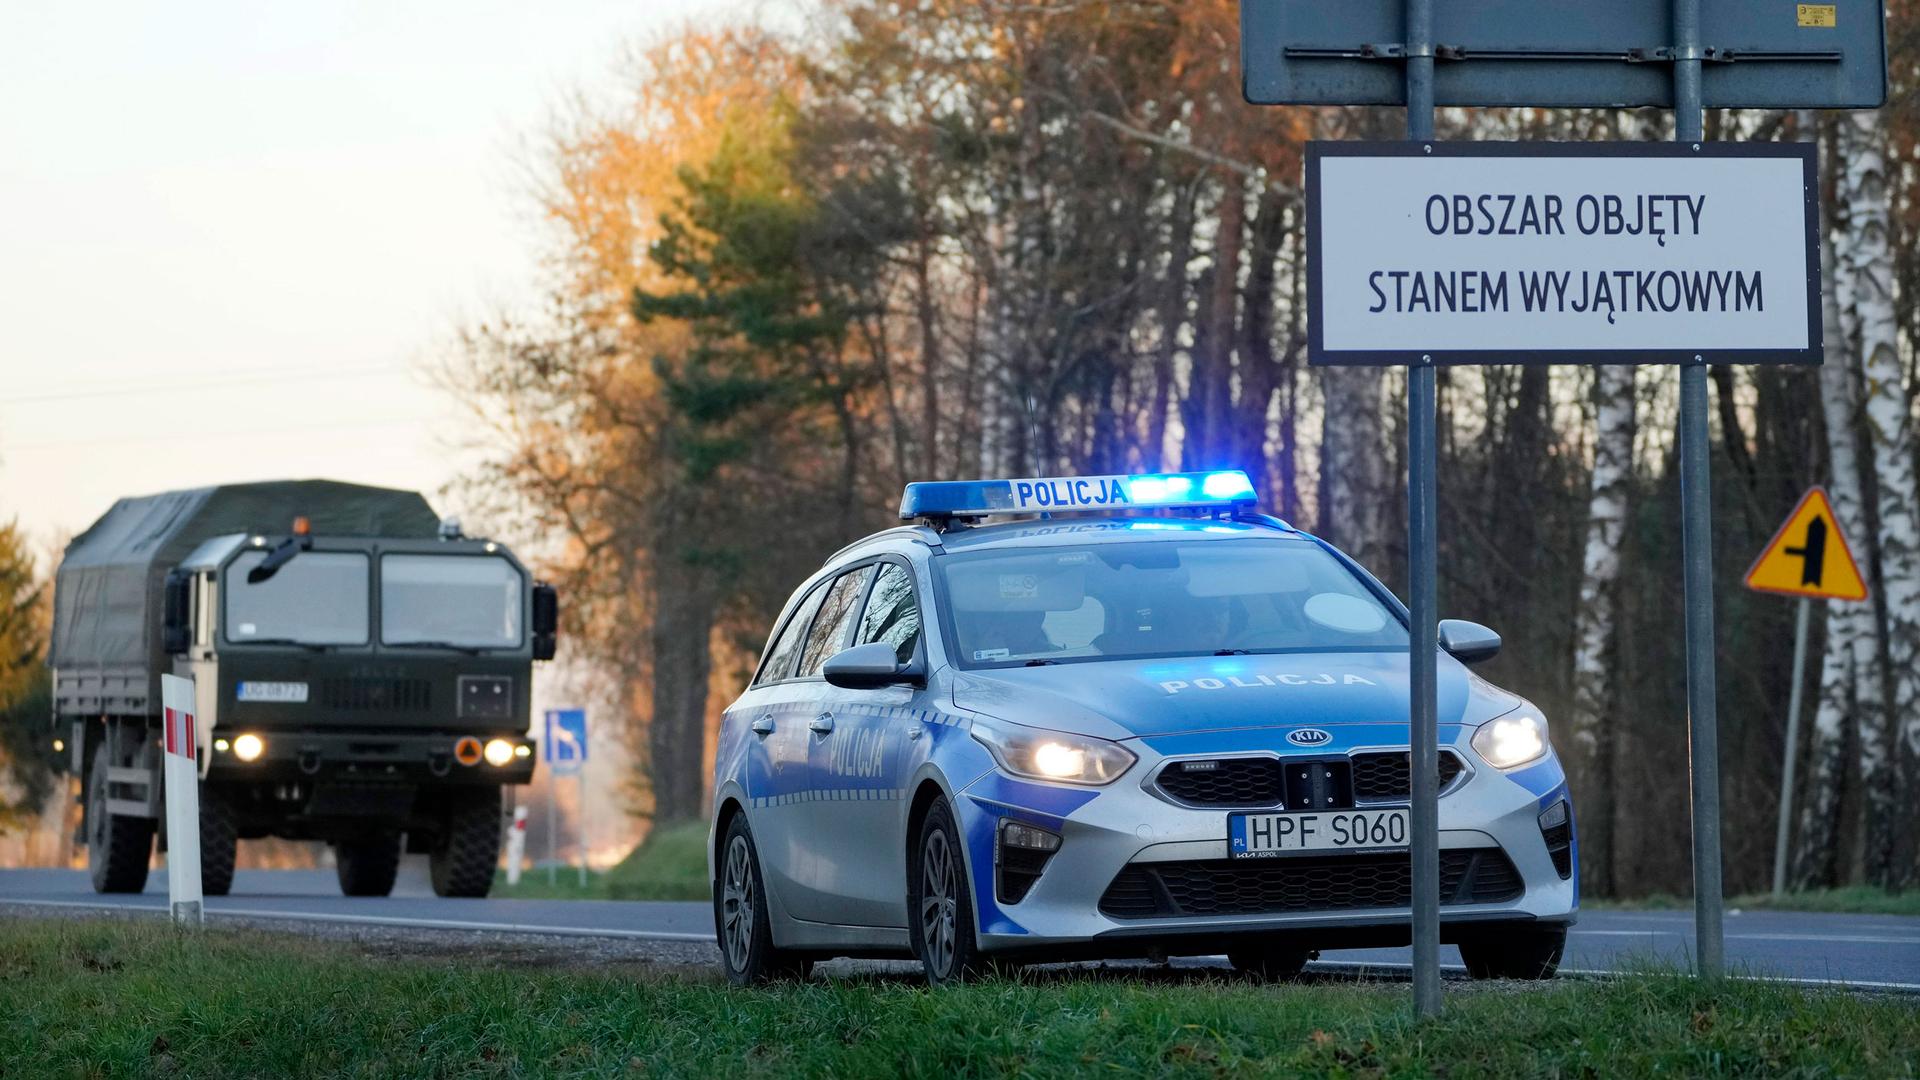 A Polish police car and a military truck are parked at a makeshift check point at the perimeter of the emergency state that covers a 1.9 mile-wide strip along the border with Belarus, Chreptowce near Kuznica, Poland, on Tuesday, Nov. 9, 2021.